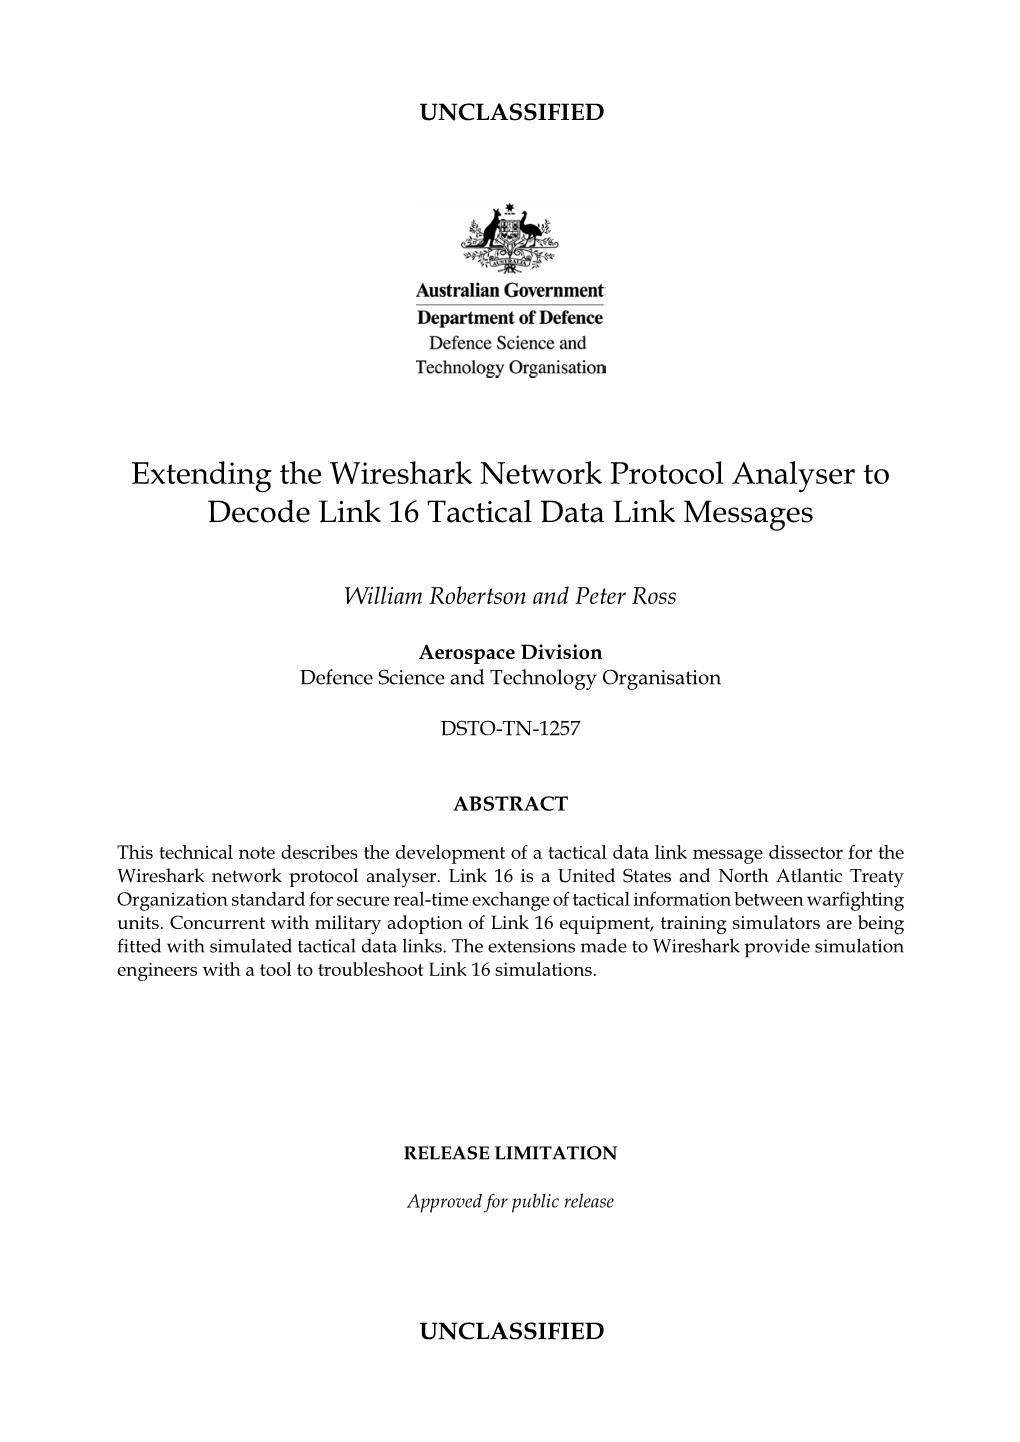 Extending the Wireshark Network Protocol Analyser to Decode Link 16 Tactical Data Link Messages